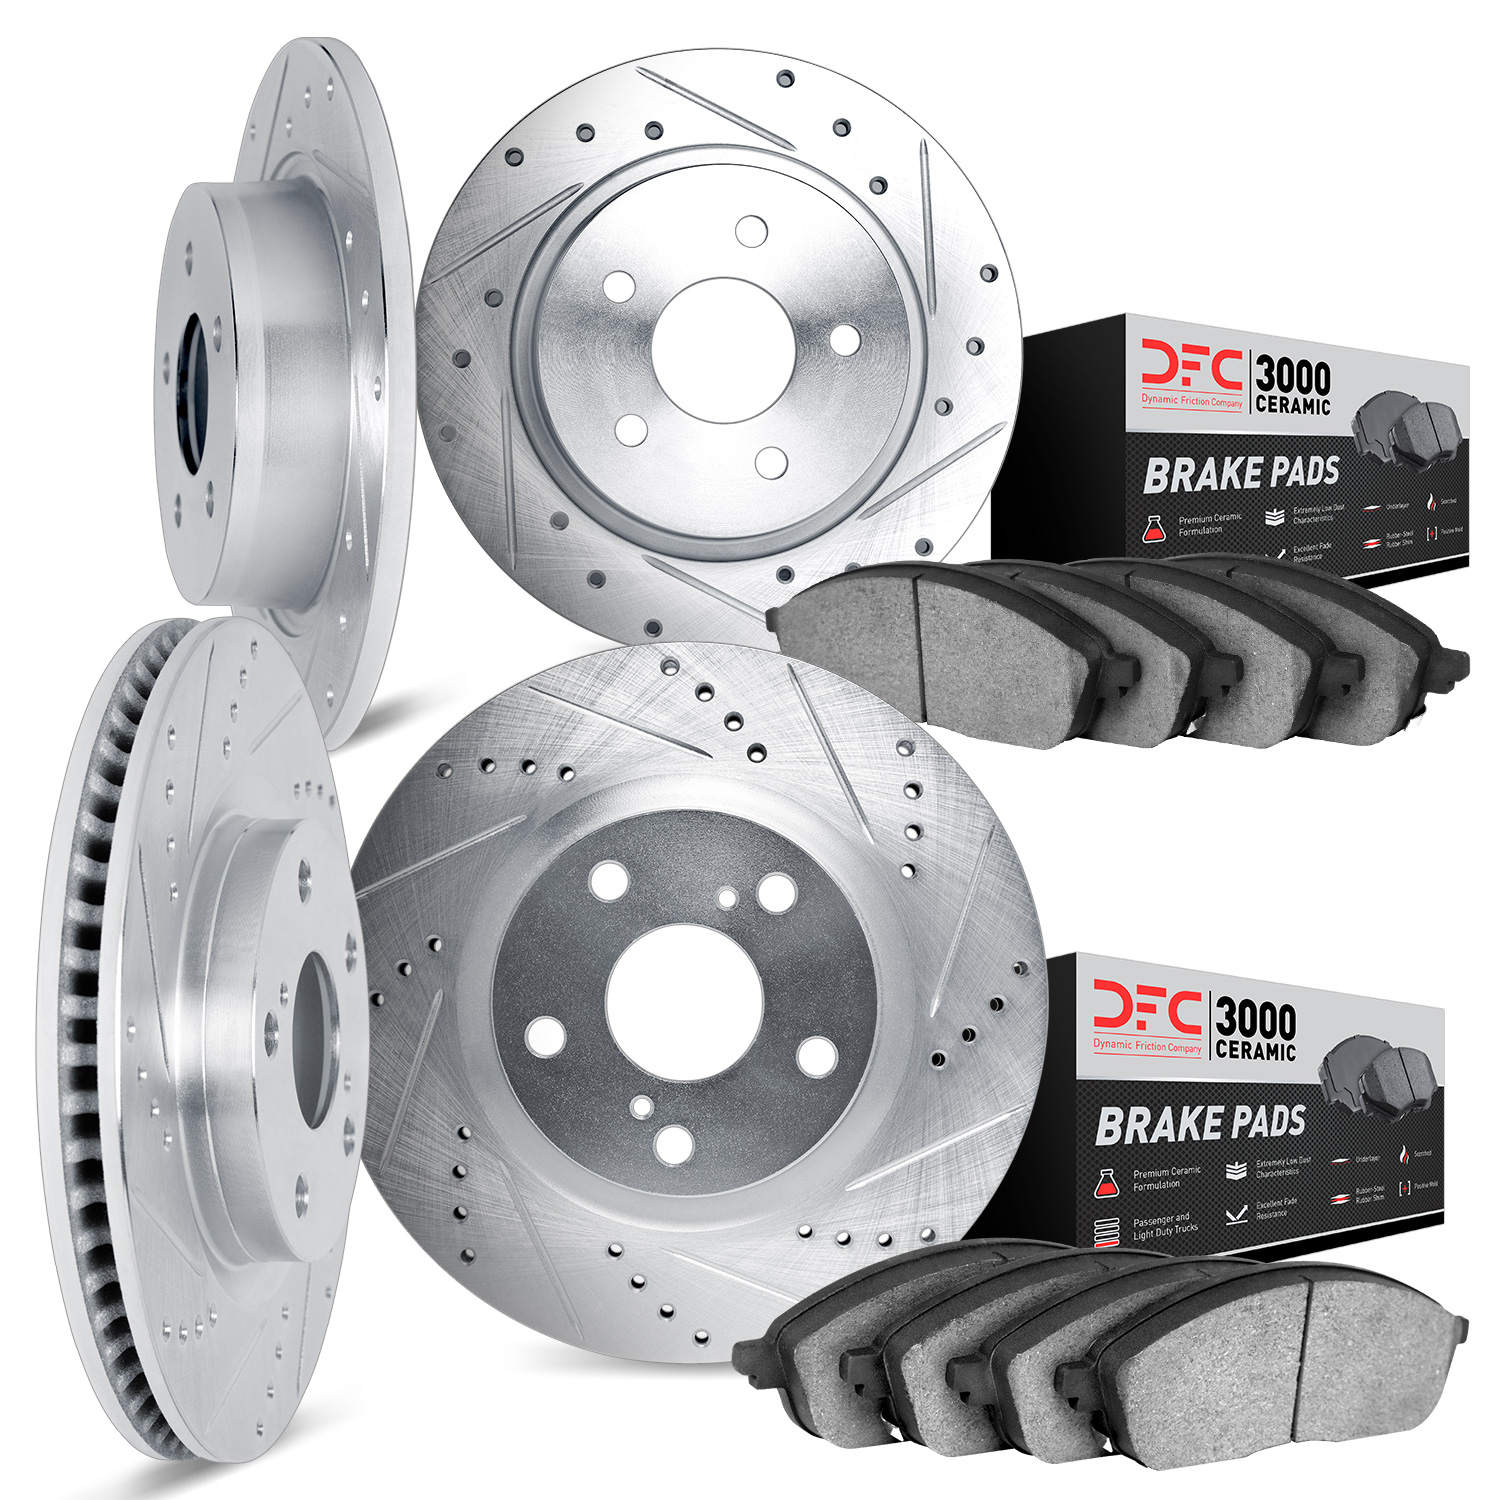 7304-42001 Drilled/Slotted Brake Rotor with 3000-Series Ceramic Brake Pads Kit [Silver], 1993-1994 Mopar, Position: Front and Re